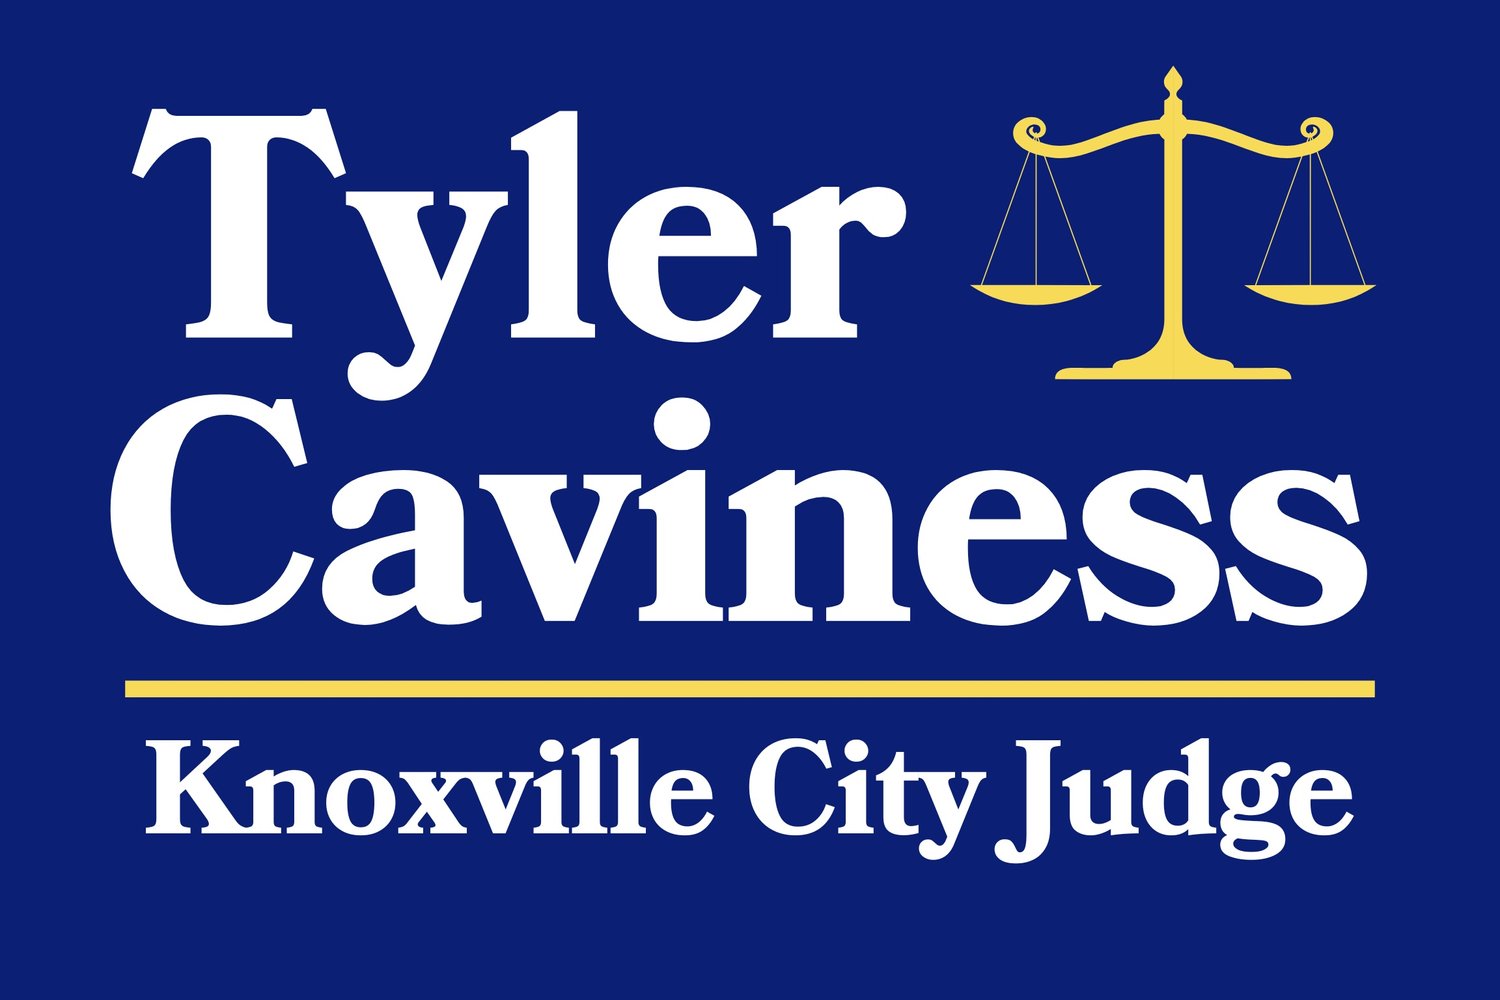 Tyler Caviness for Judge